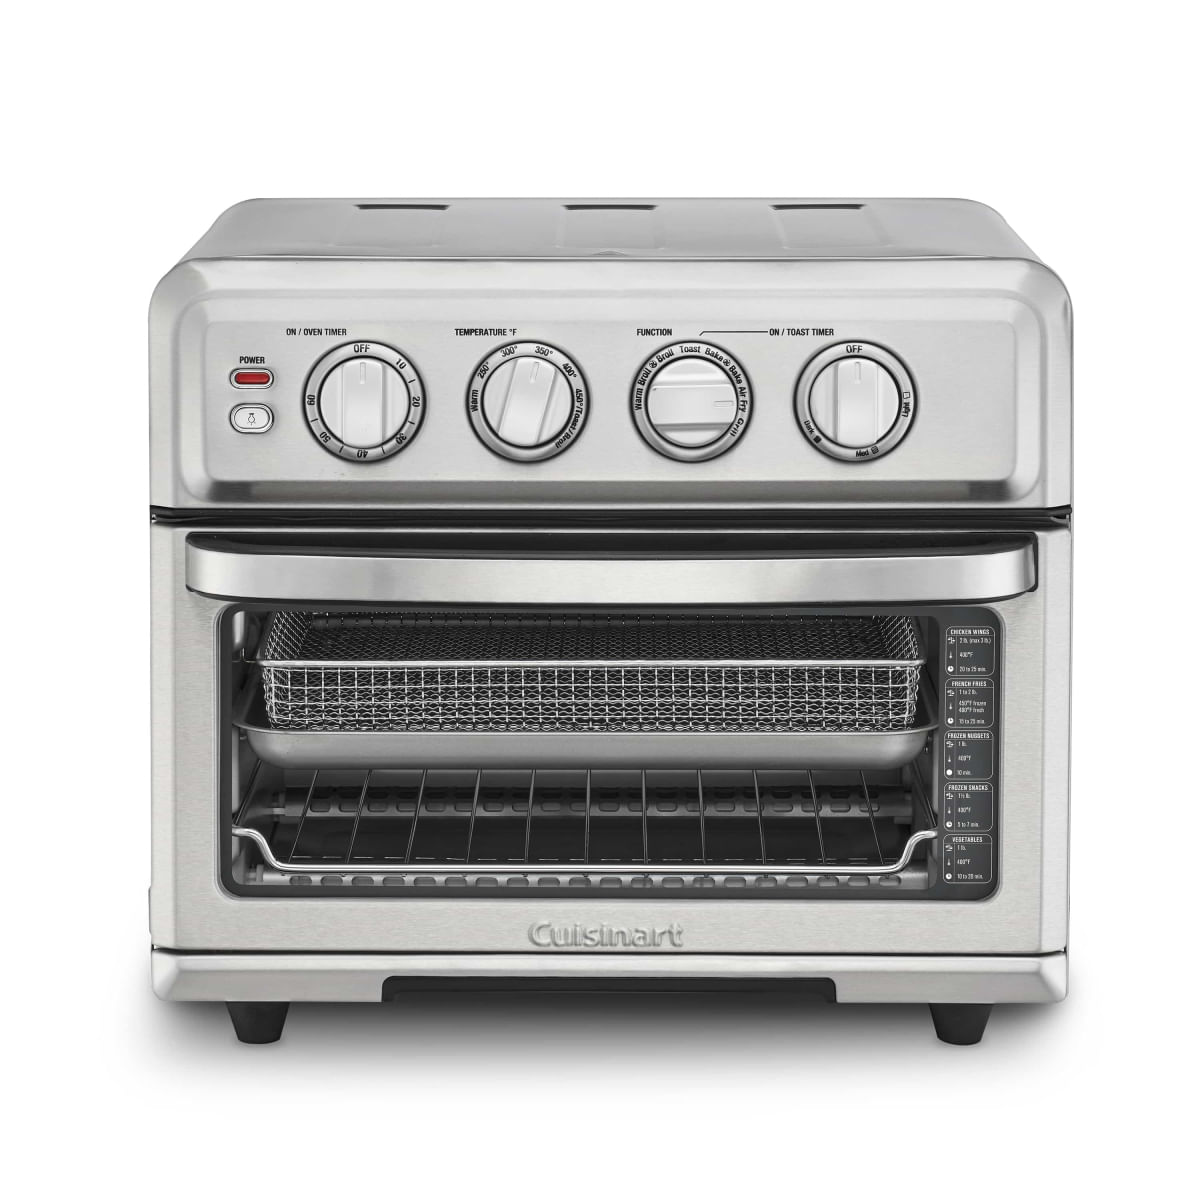 Airfryer + Forno Ovenfryer 17L Cuisinart Grill | 220V